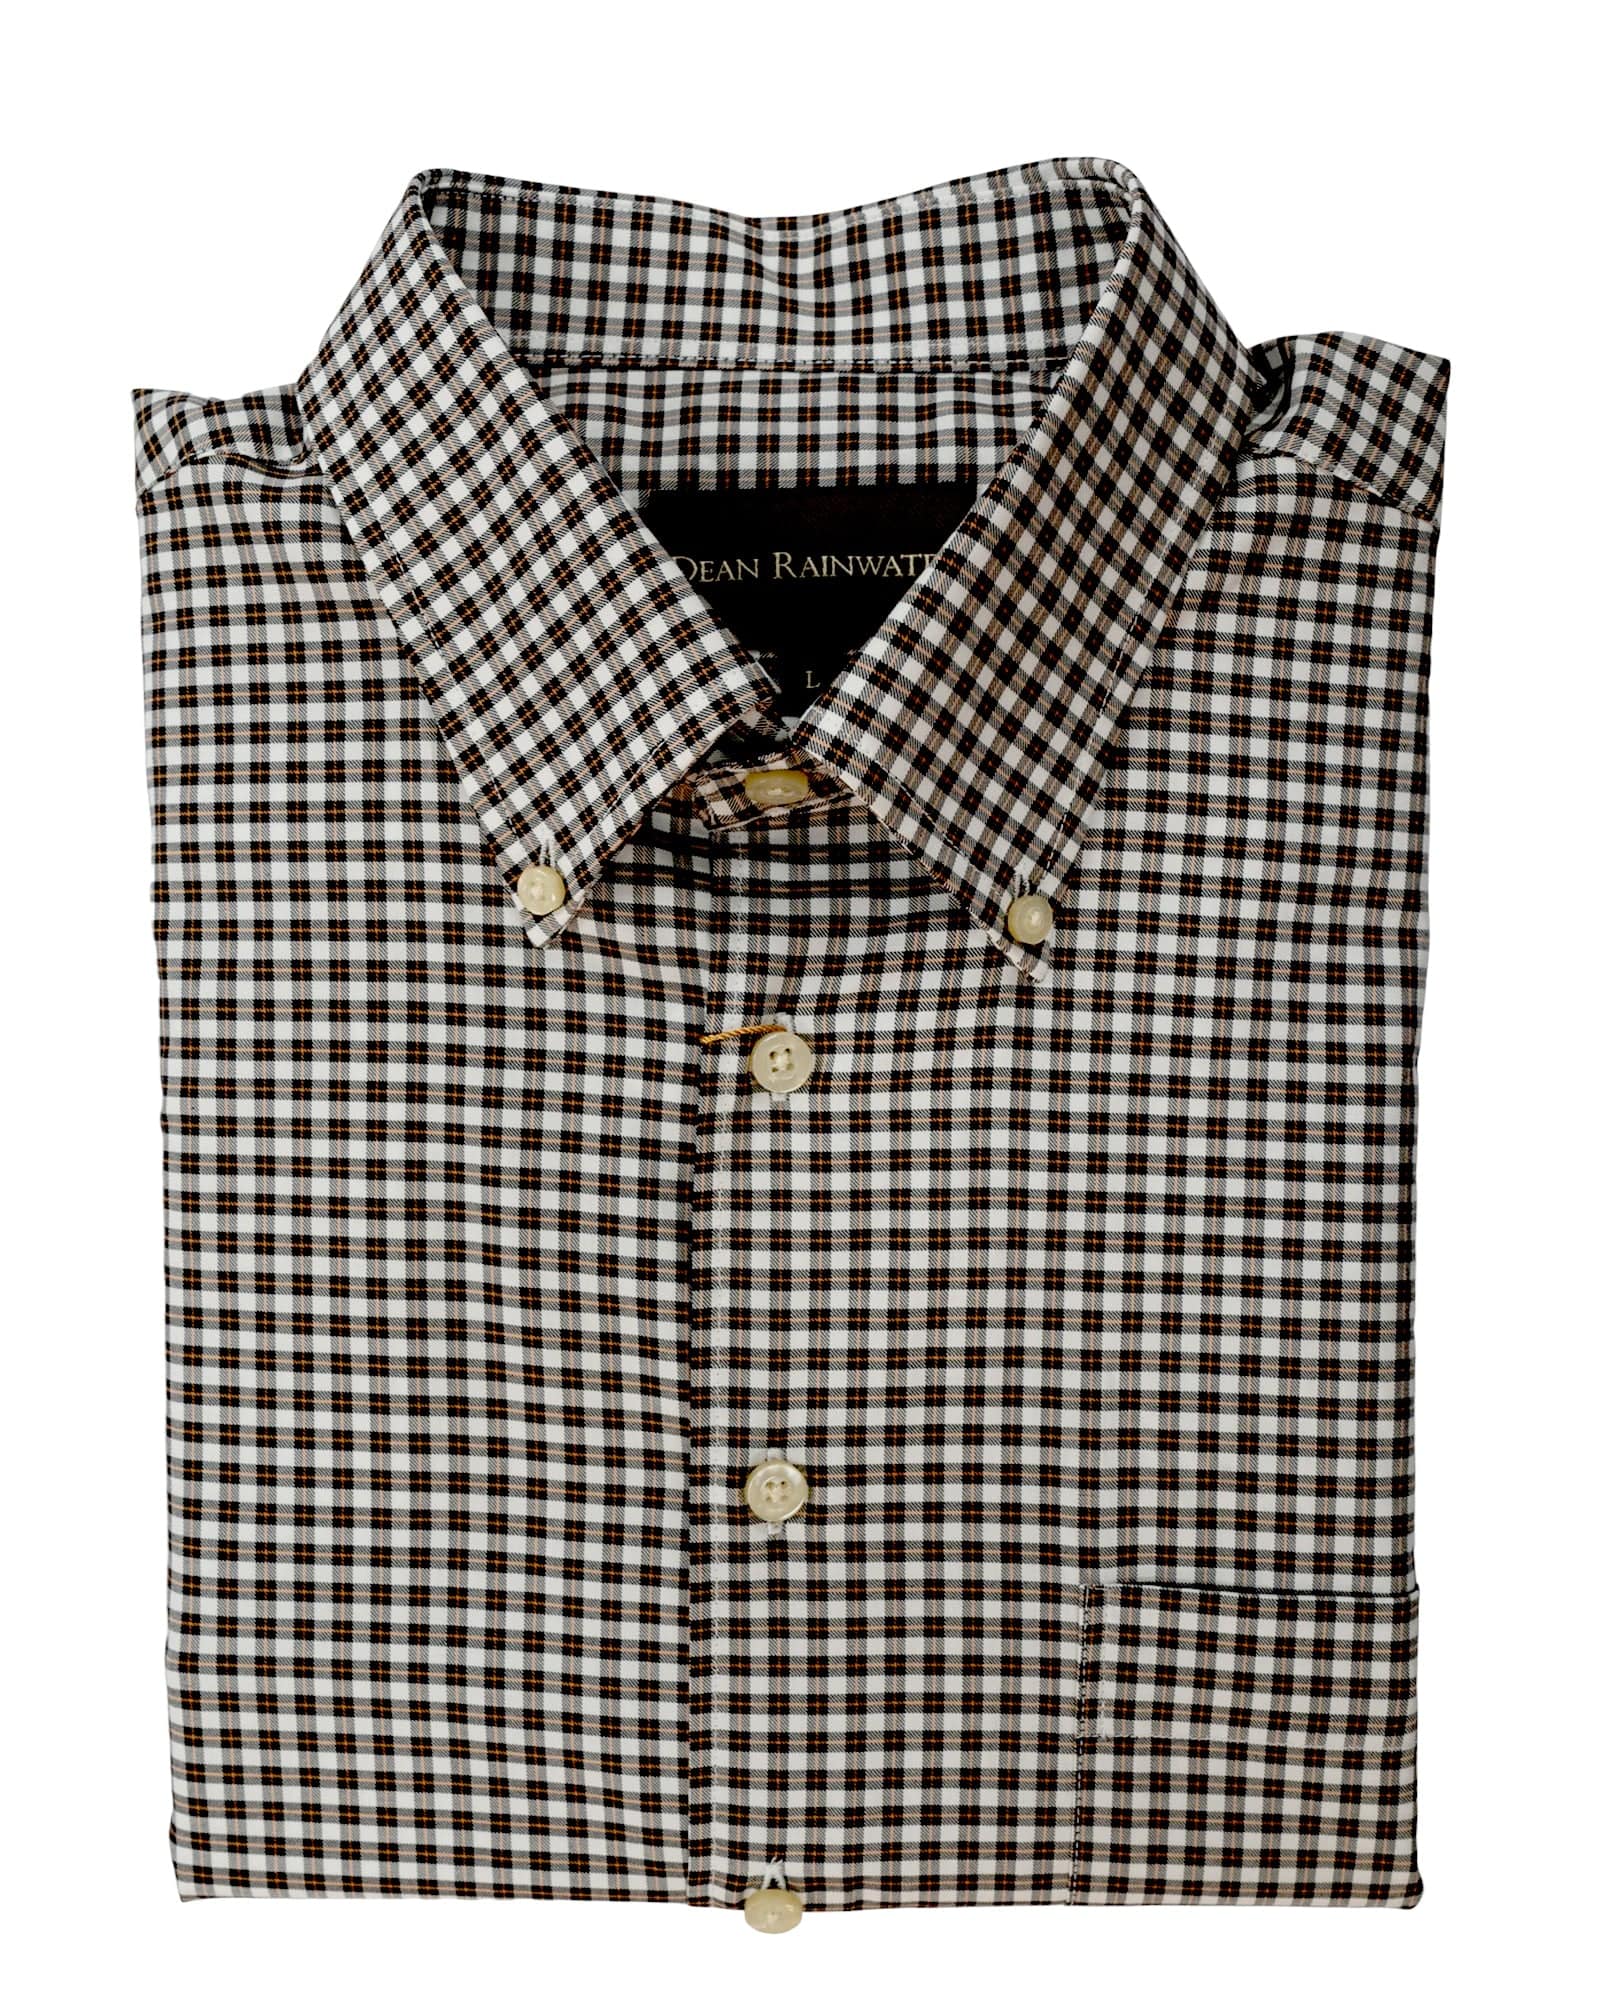 Dean Rainwater's White with Black and Gold Sport Shirt - Rainwater's Men's Clothing and Tuxedo Rental